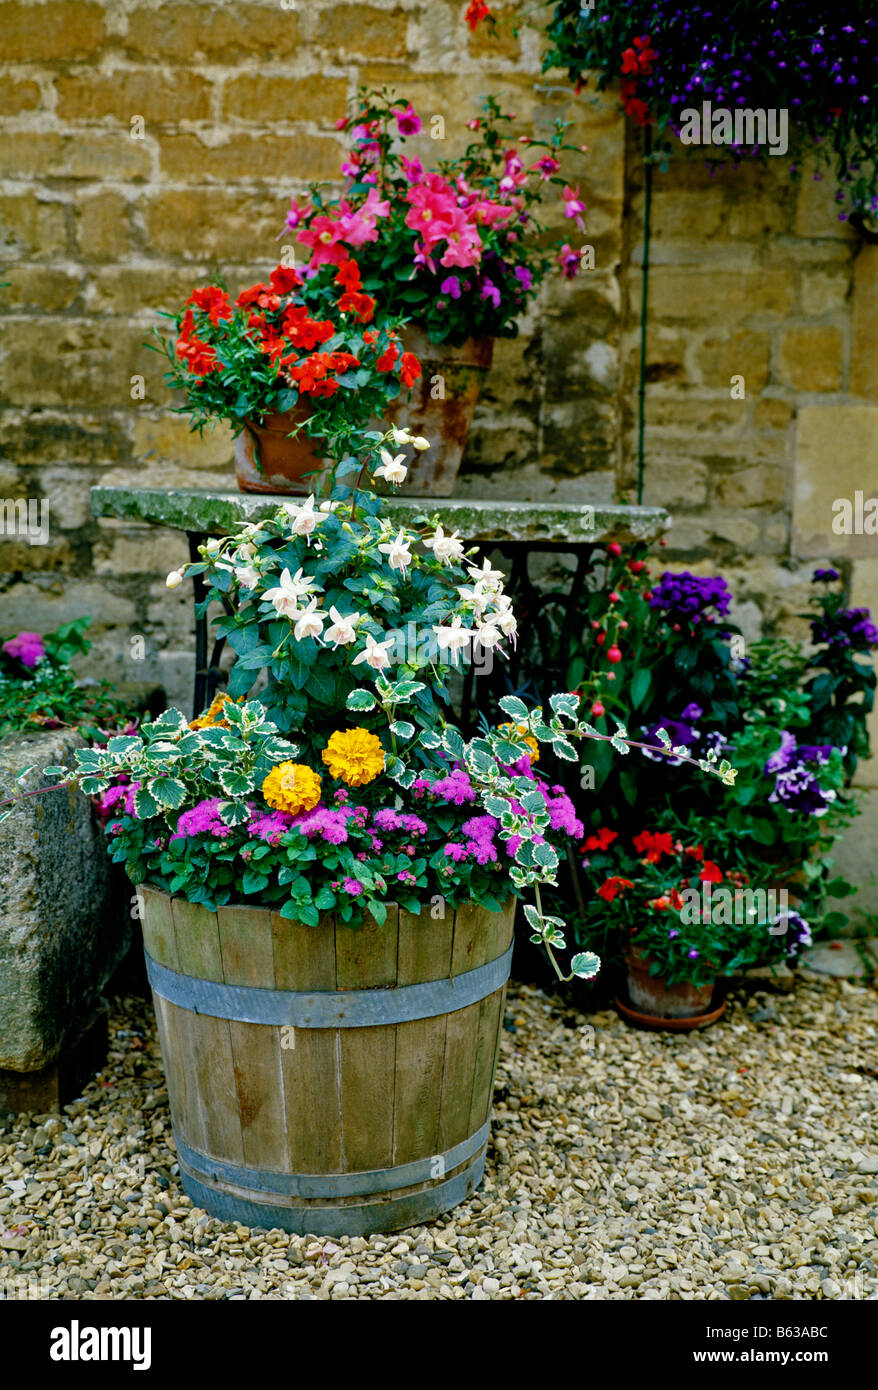 Display of Colourful Planted Containers Stock Photo